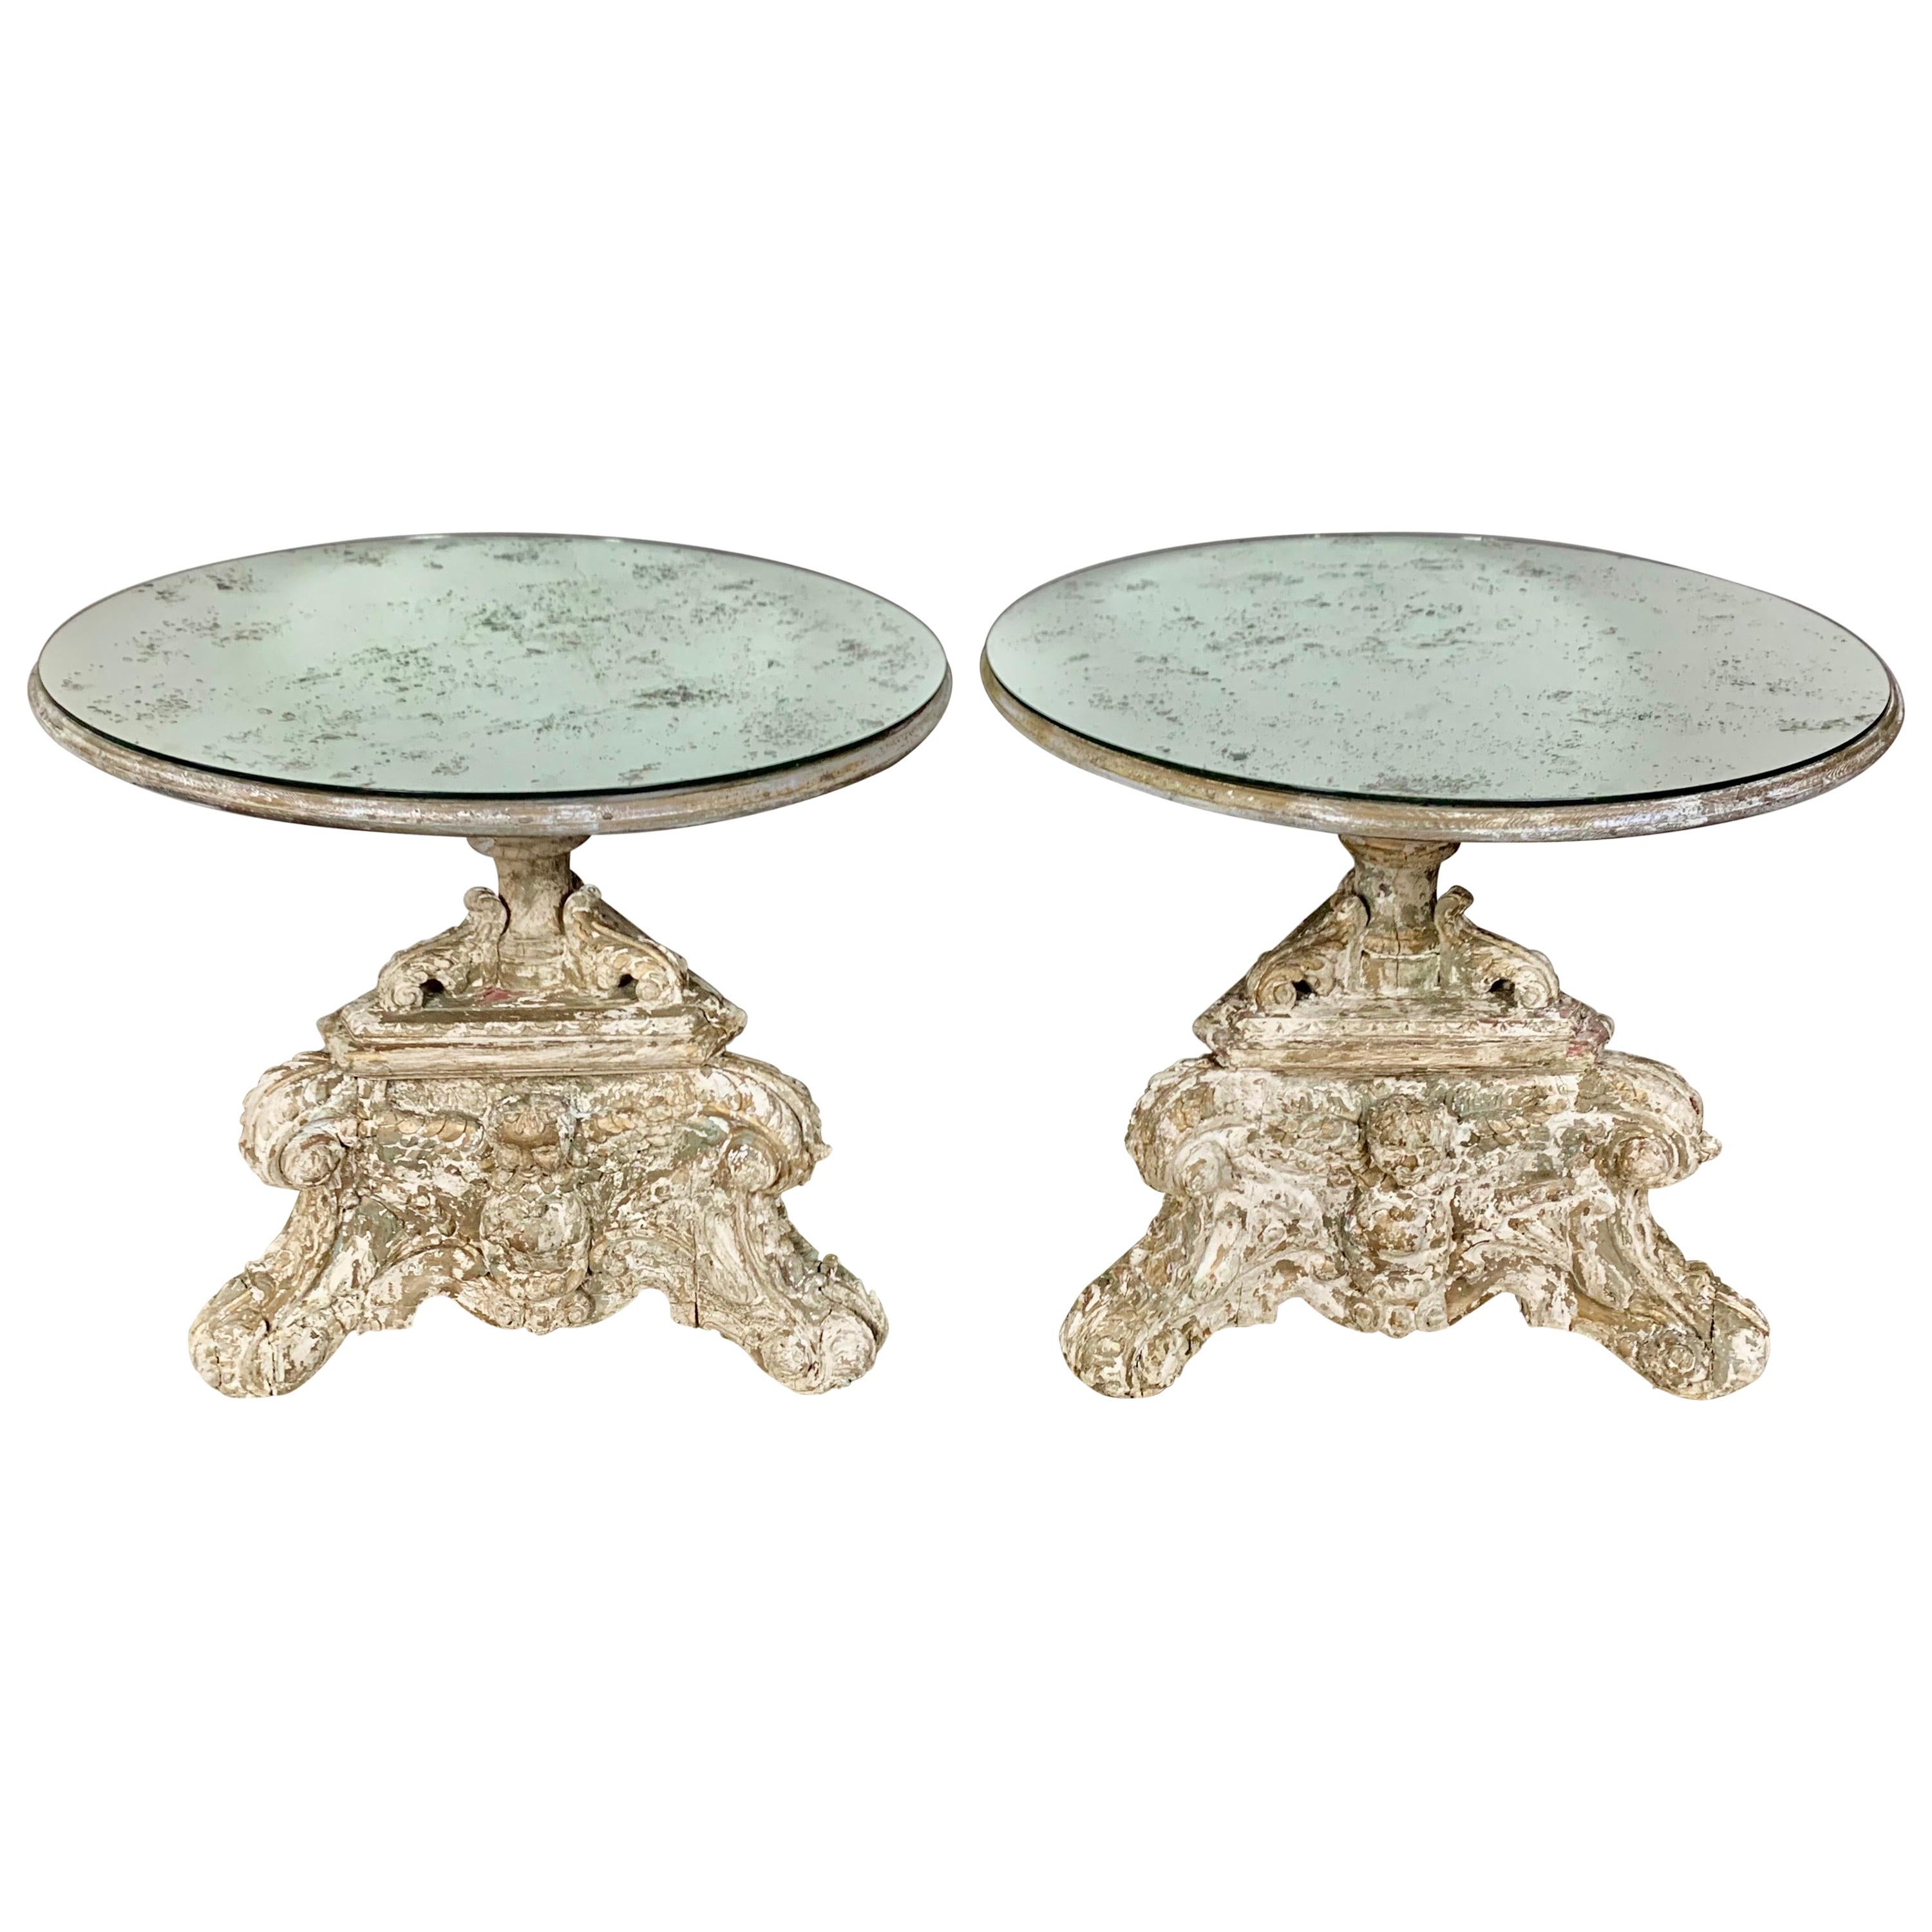 Pair of Italian Painted 1930s Side Tables with Mirrored Tops